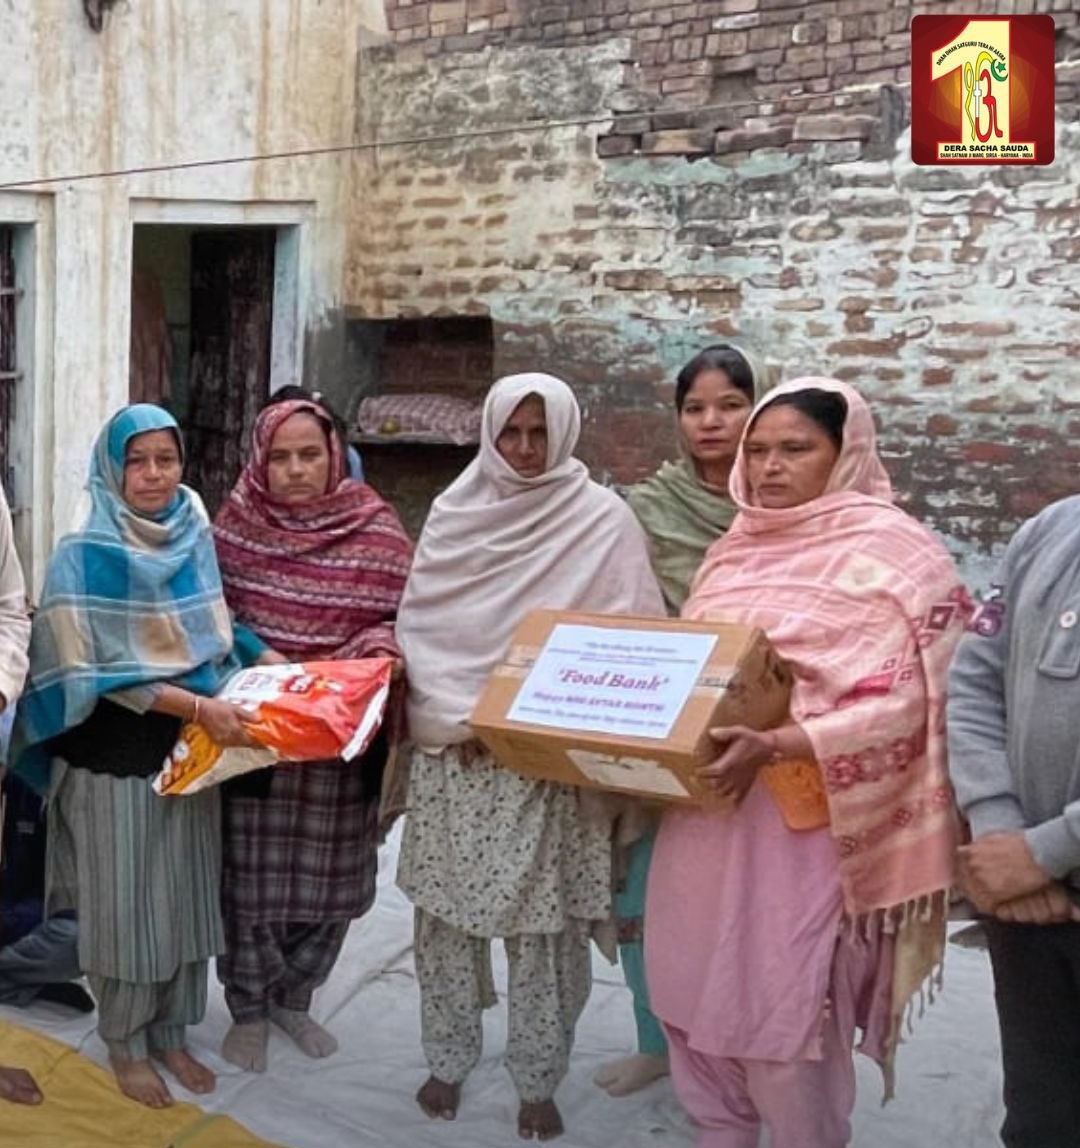 A #FastForHumanity as a campaign not let to sleep hungry anyone in this world. The campaign started by Saint
Ram Rahim Ji is known as Food Bank, followers keep fast once in a week & by using saved money from food is utilised to provide food & ration to needy.